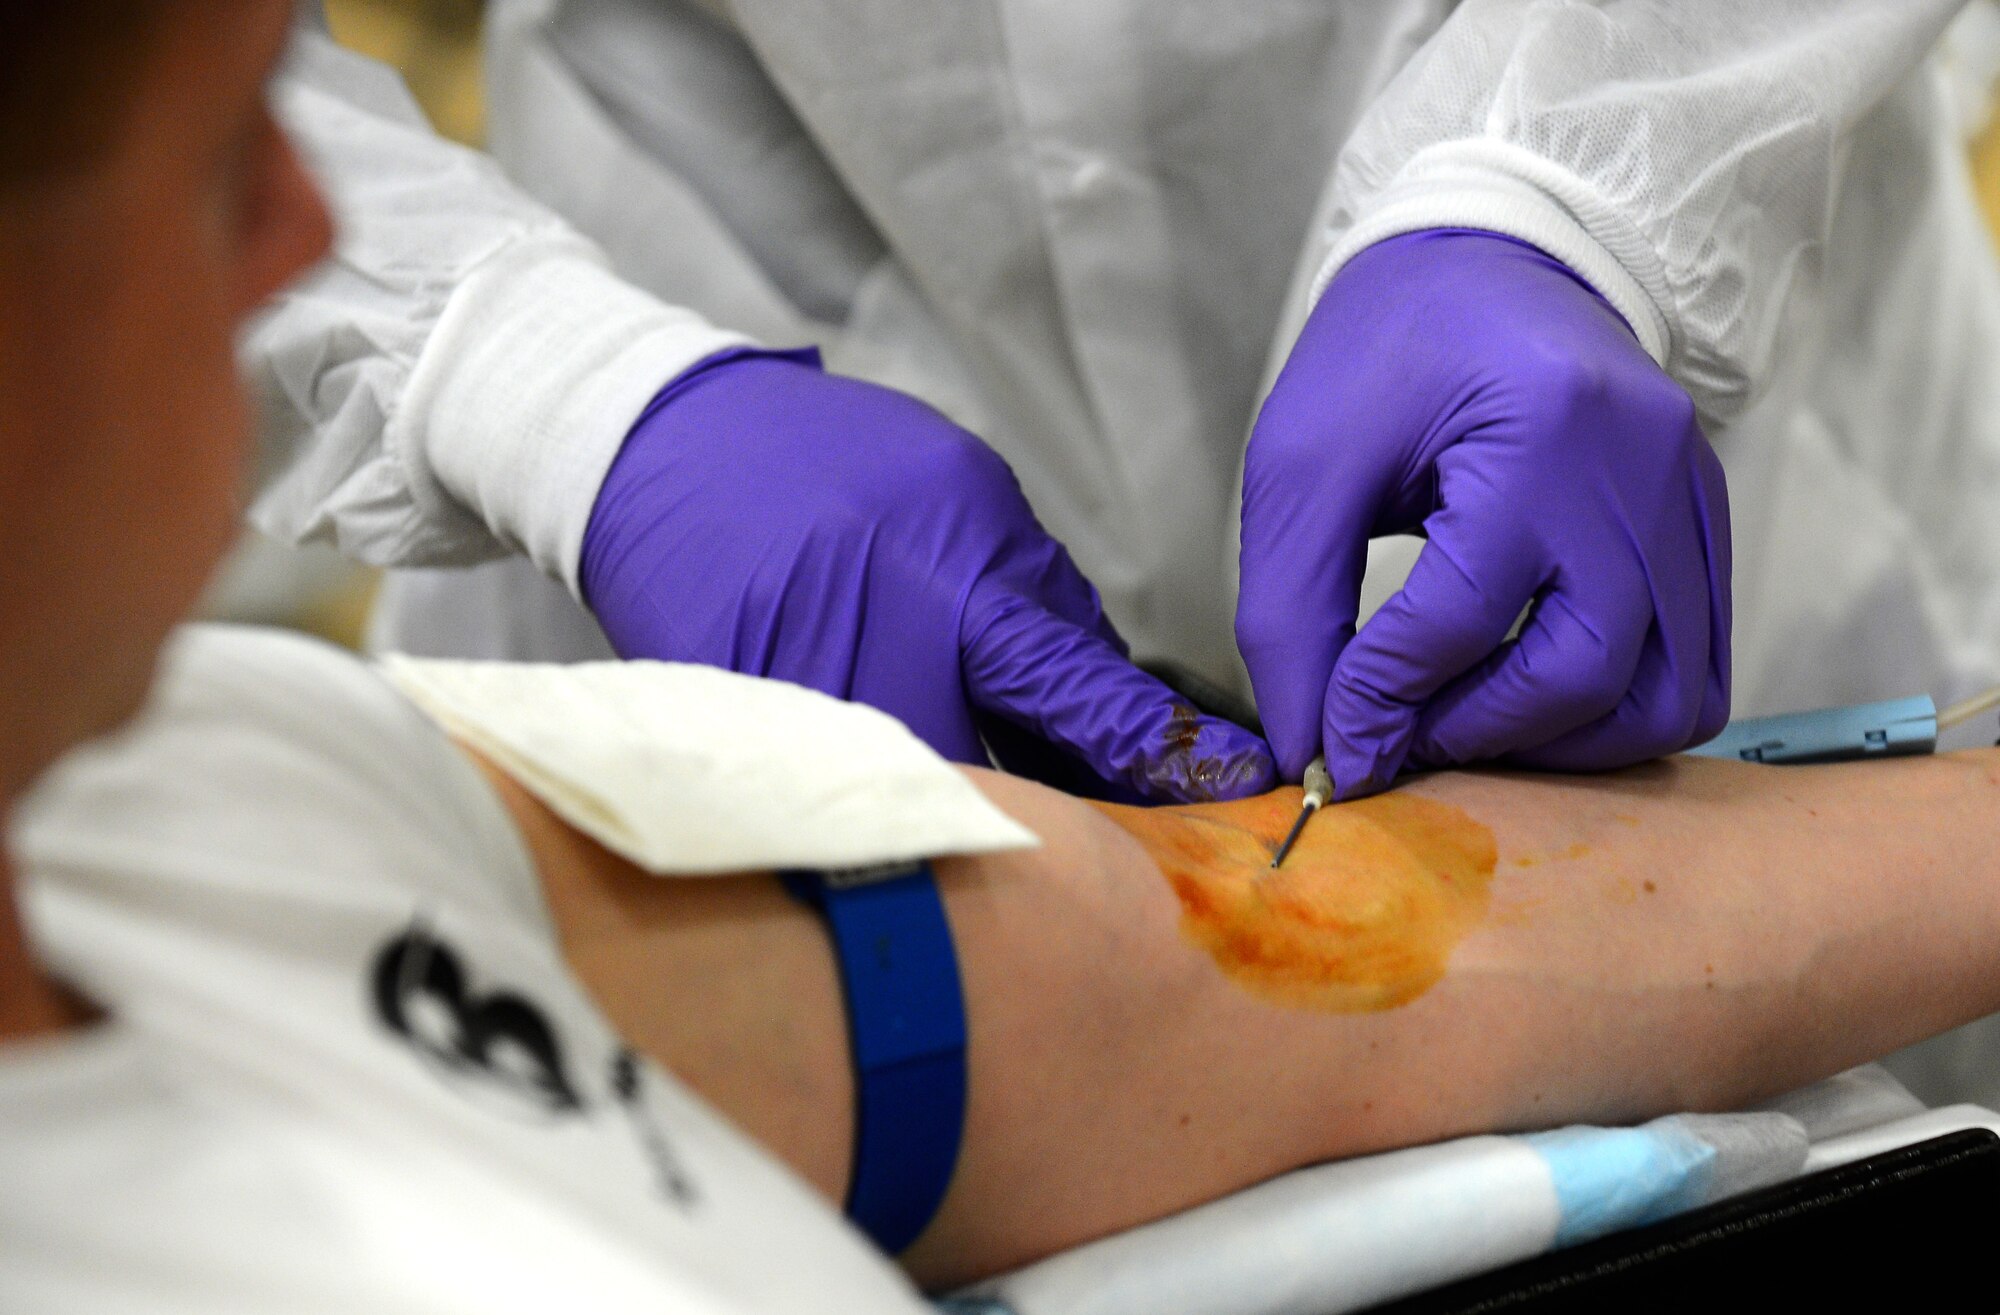 A Landstuhl Regional Medical Center laboratory technician inserts an intravenous line into a donor’s arm at the Brick House in the community center during the Armed Services Blood Program blood drive at Spangdahlem Air Base, Germany, Jan. 20, 2015. Donors were provided with drinks and food during their 15 minute recuperation time after donating one pint of their blood. (U.S. Air Force photo by Airman 1st Class Luke Kitterman/Released)

